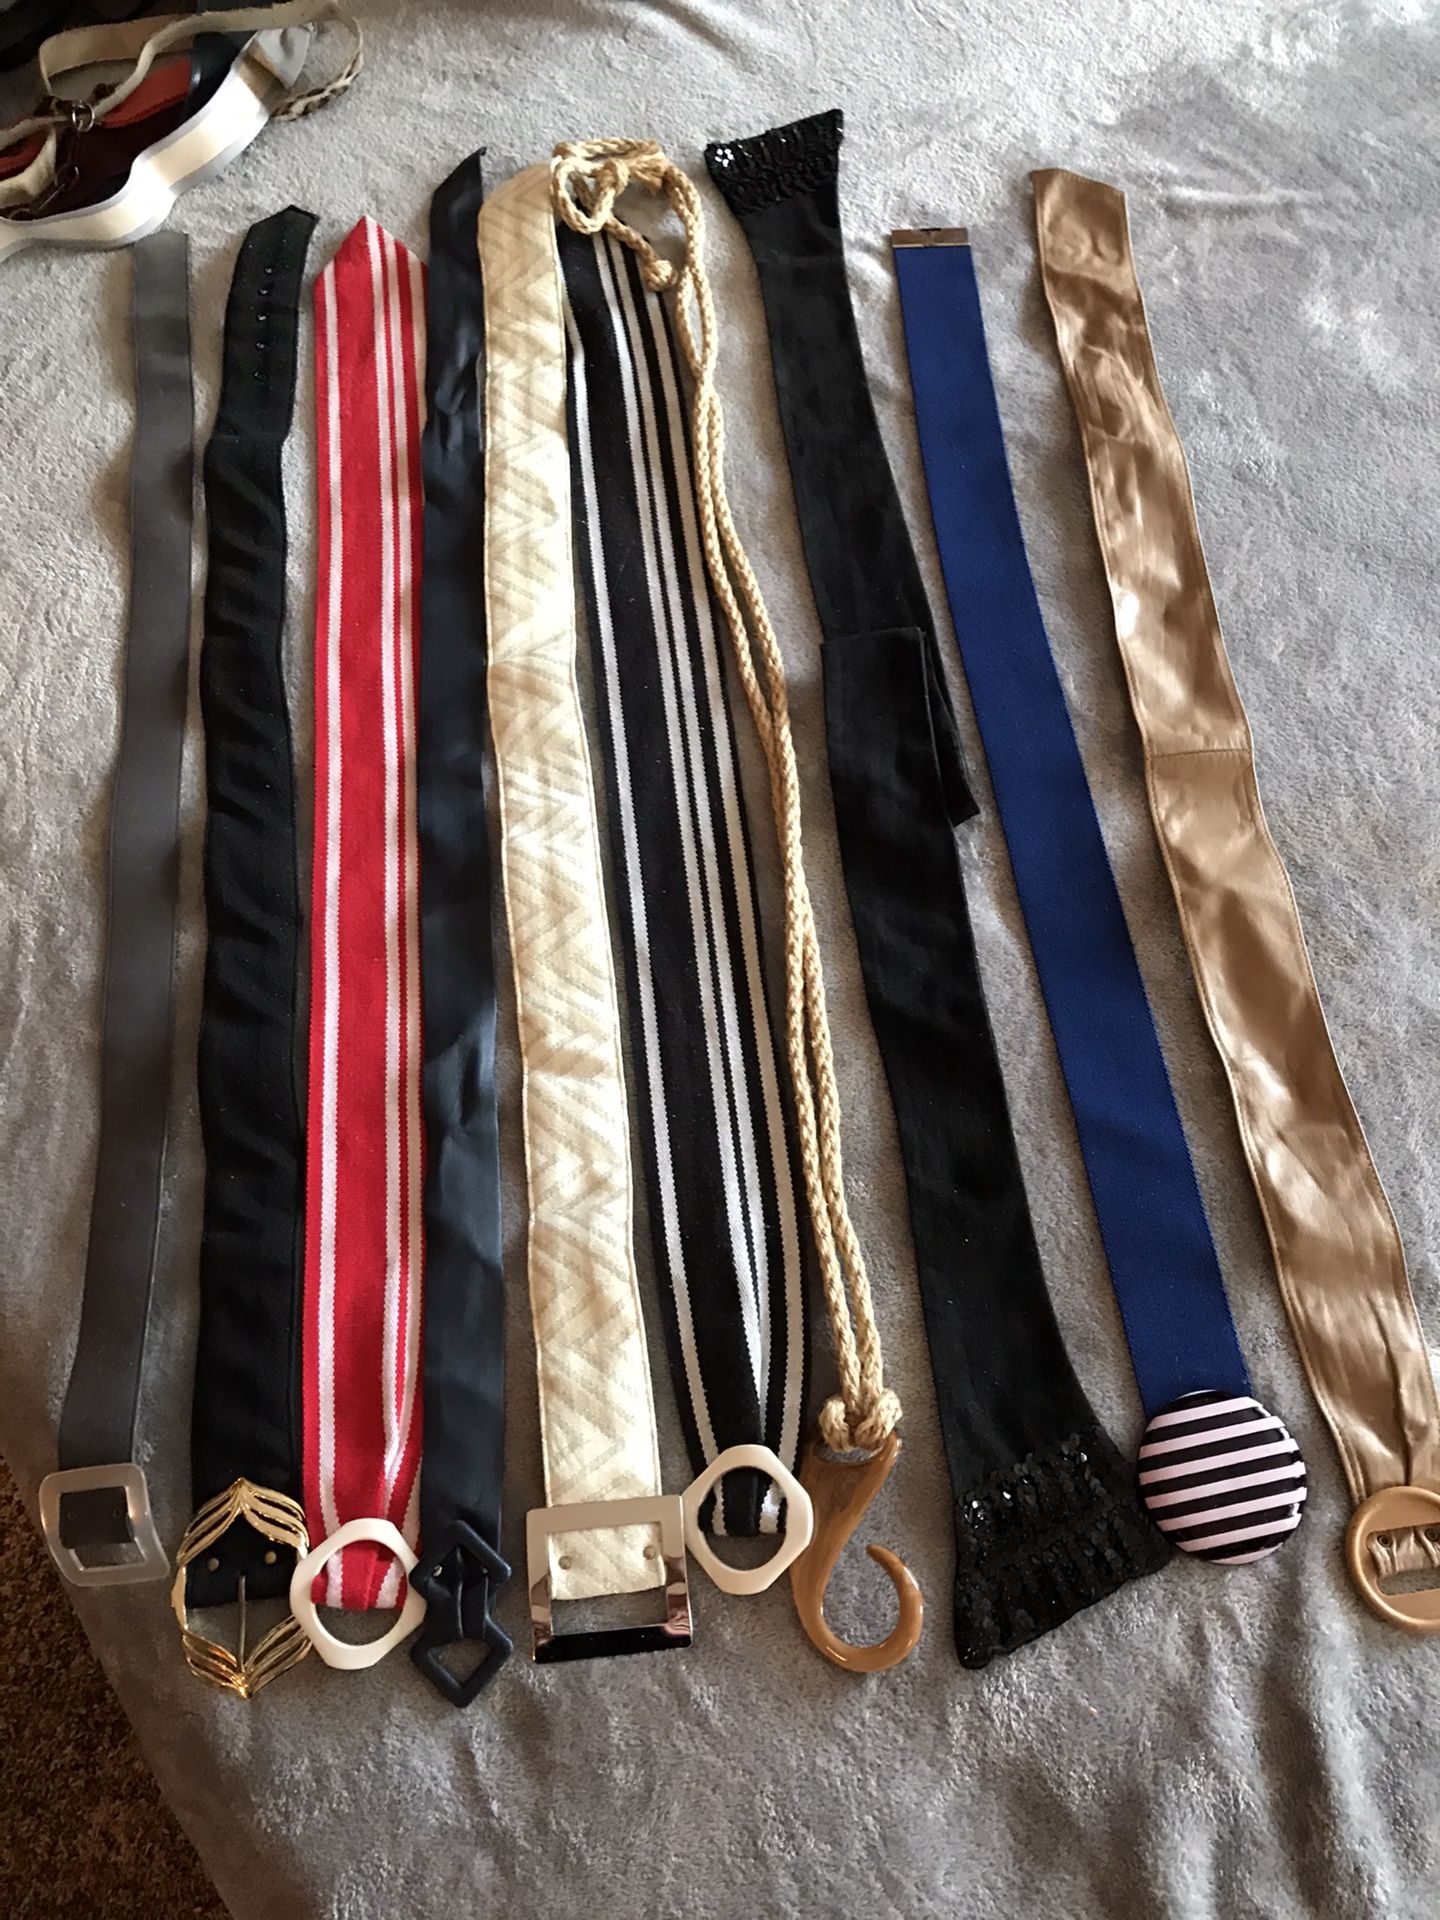 Vintage belts - small waist - Lot of 10